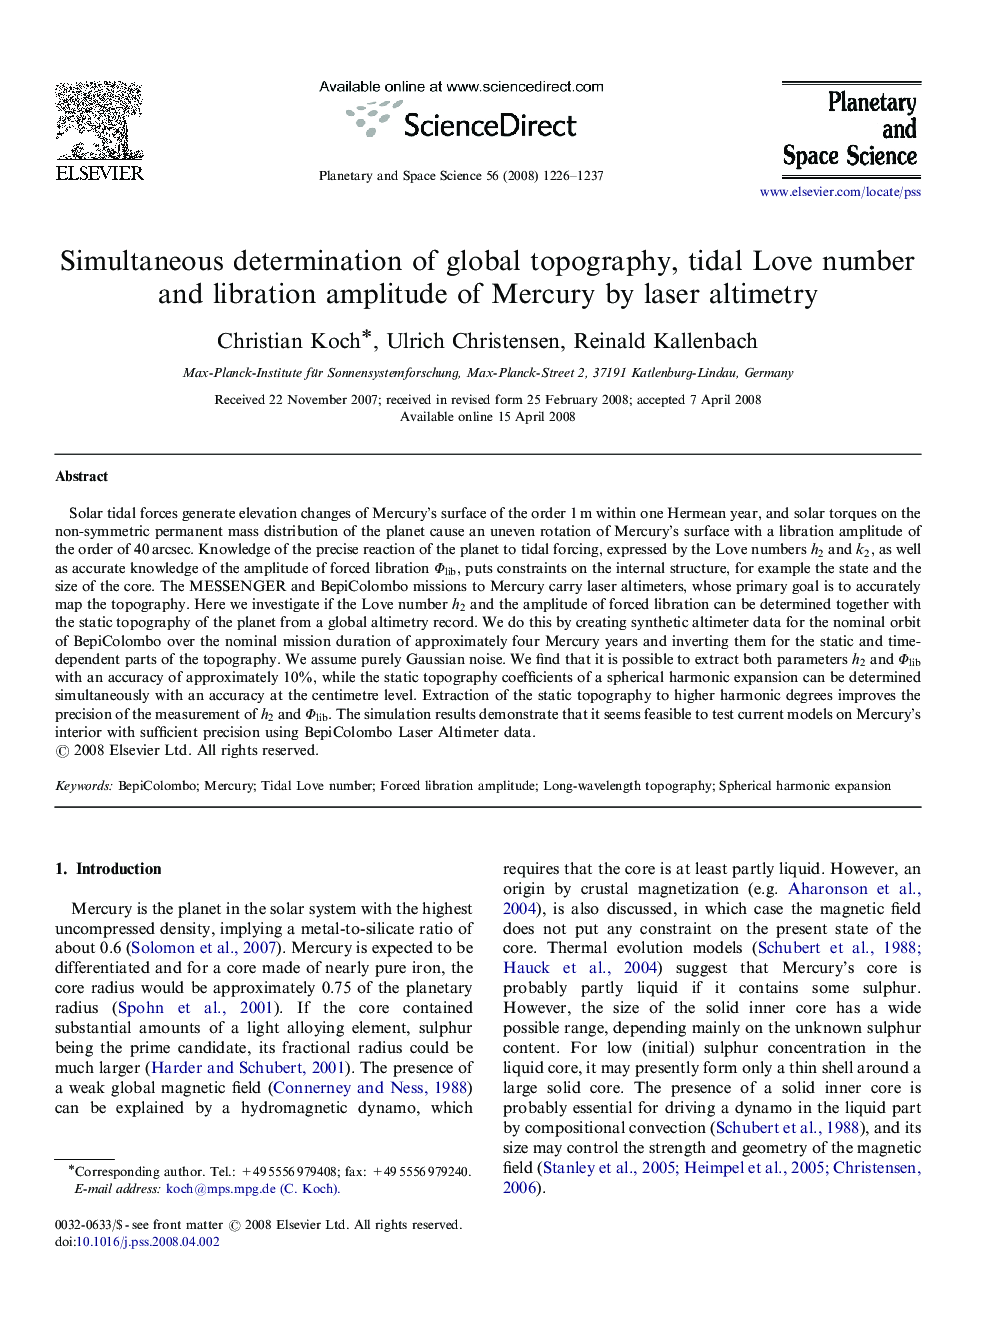 Simultaneous determination of global topography, tidal Love number and libration amplitude of Mercury by laser altimetry